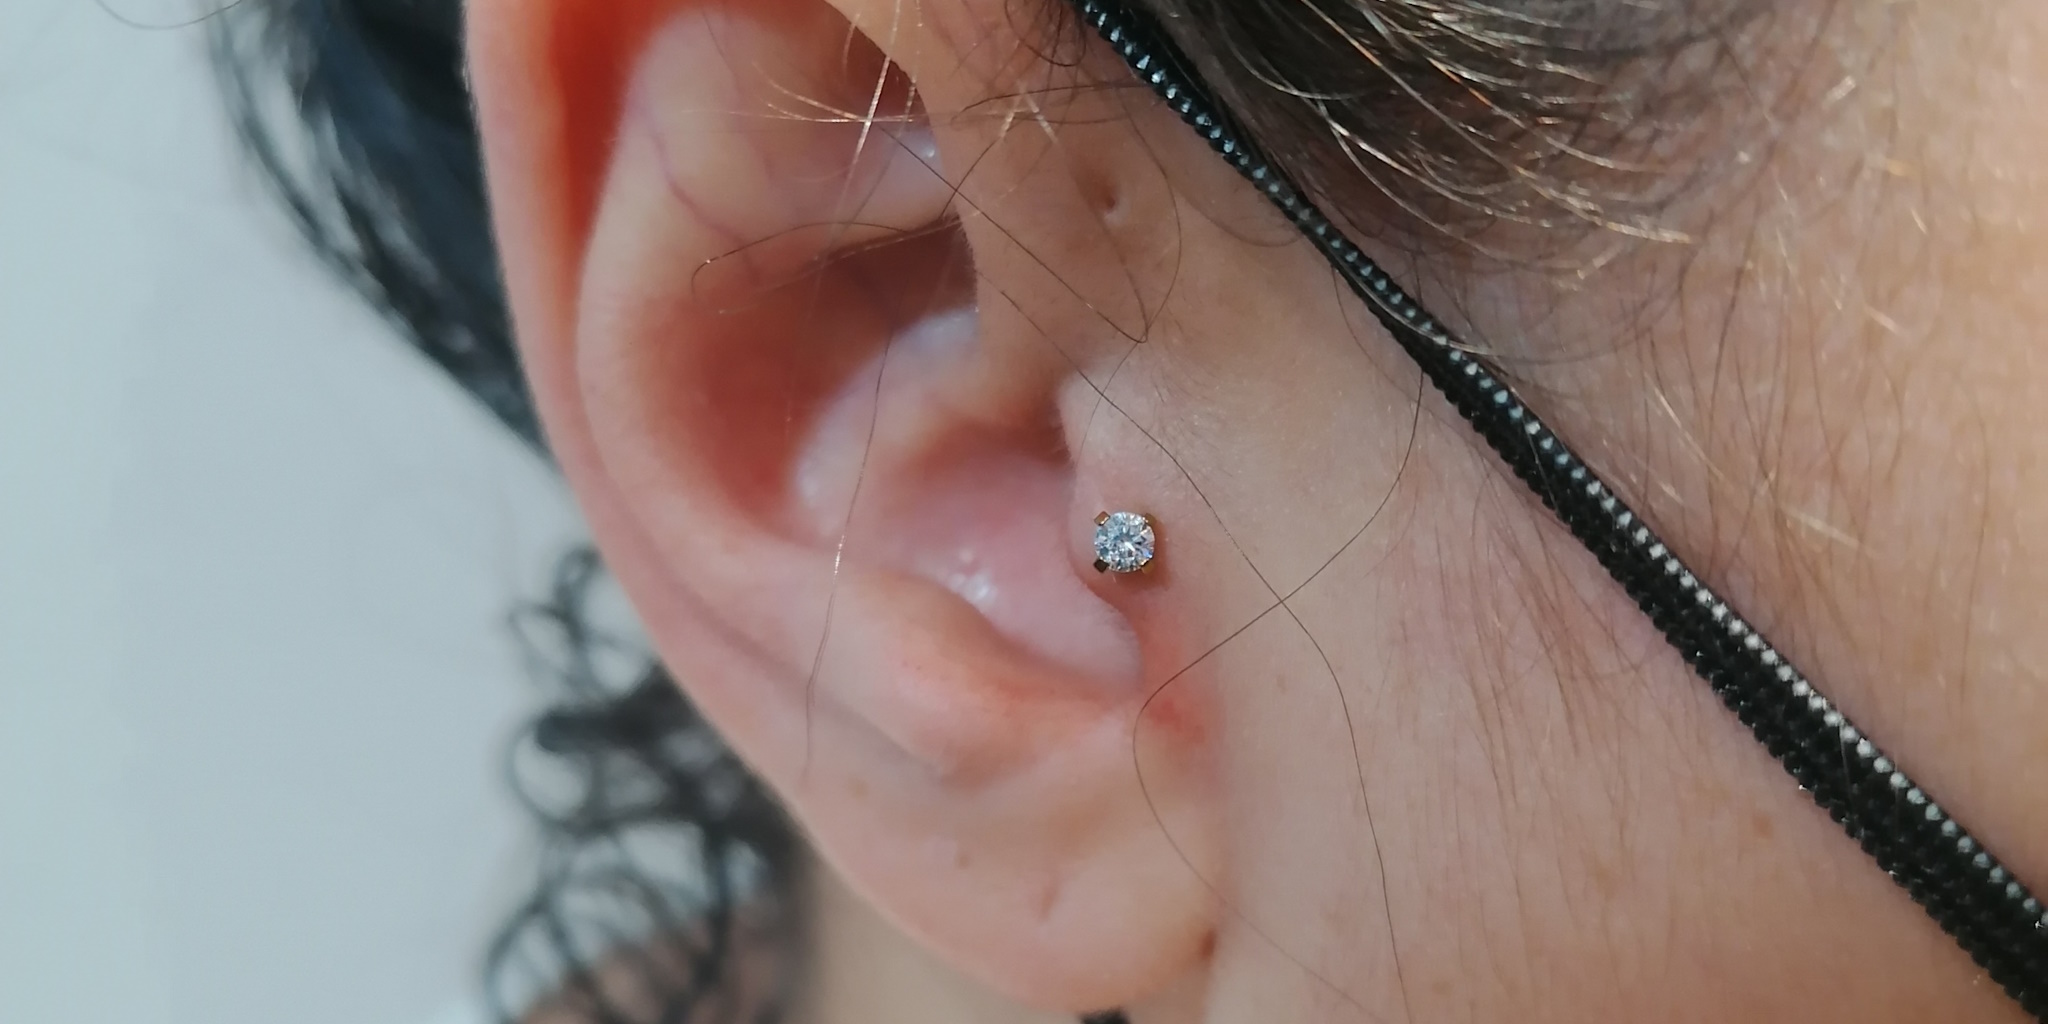 A woman with a tragus piercing.